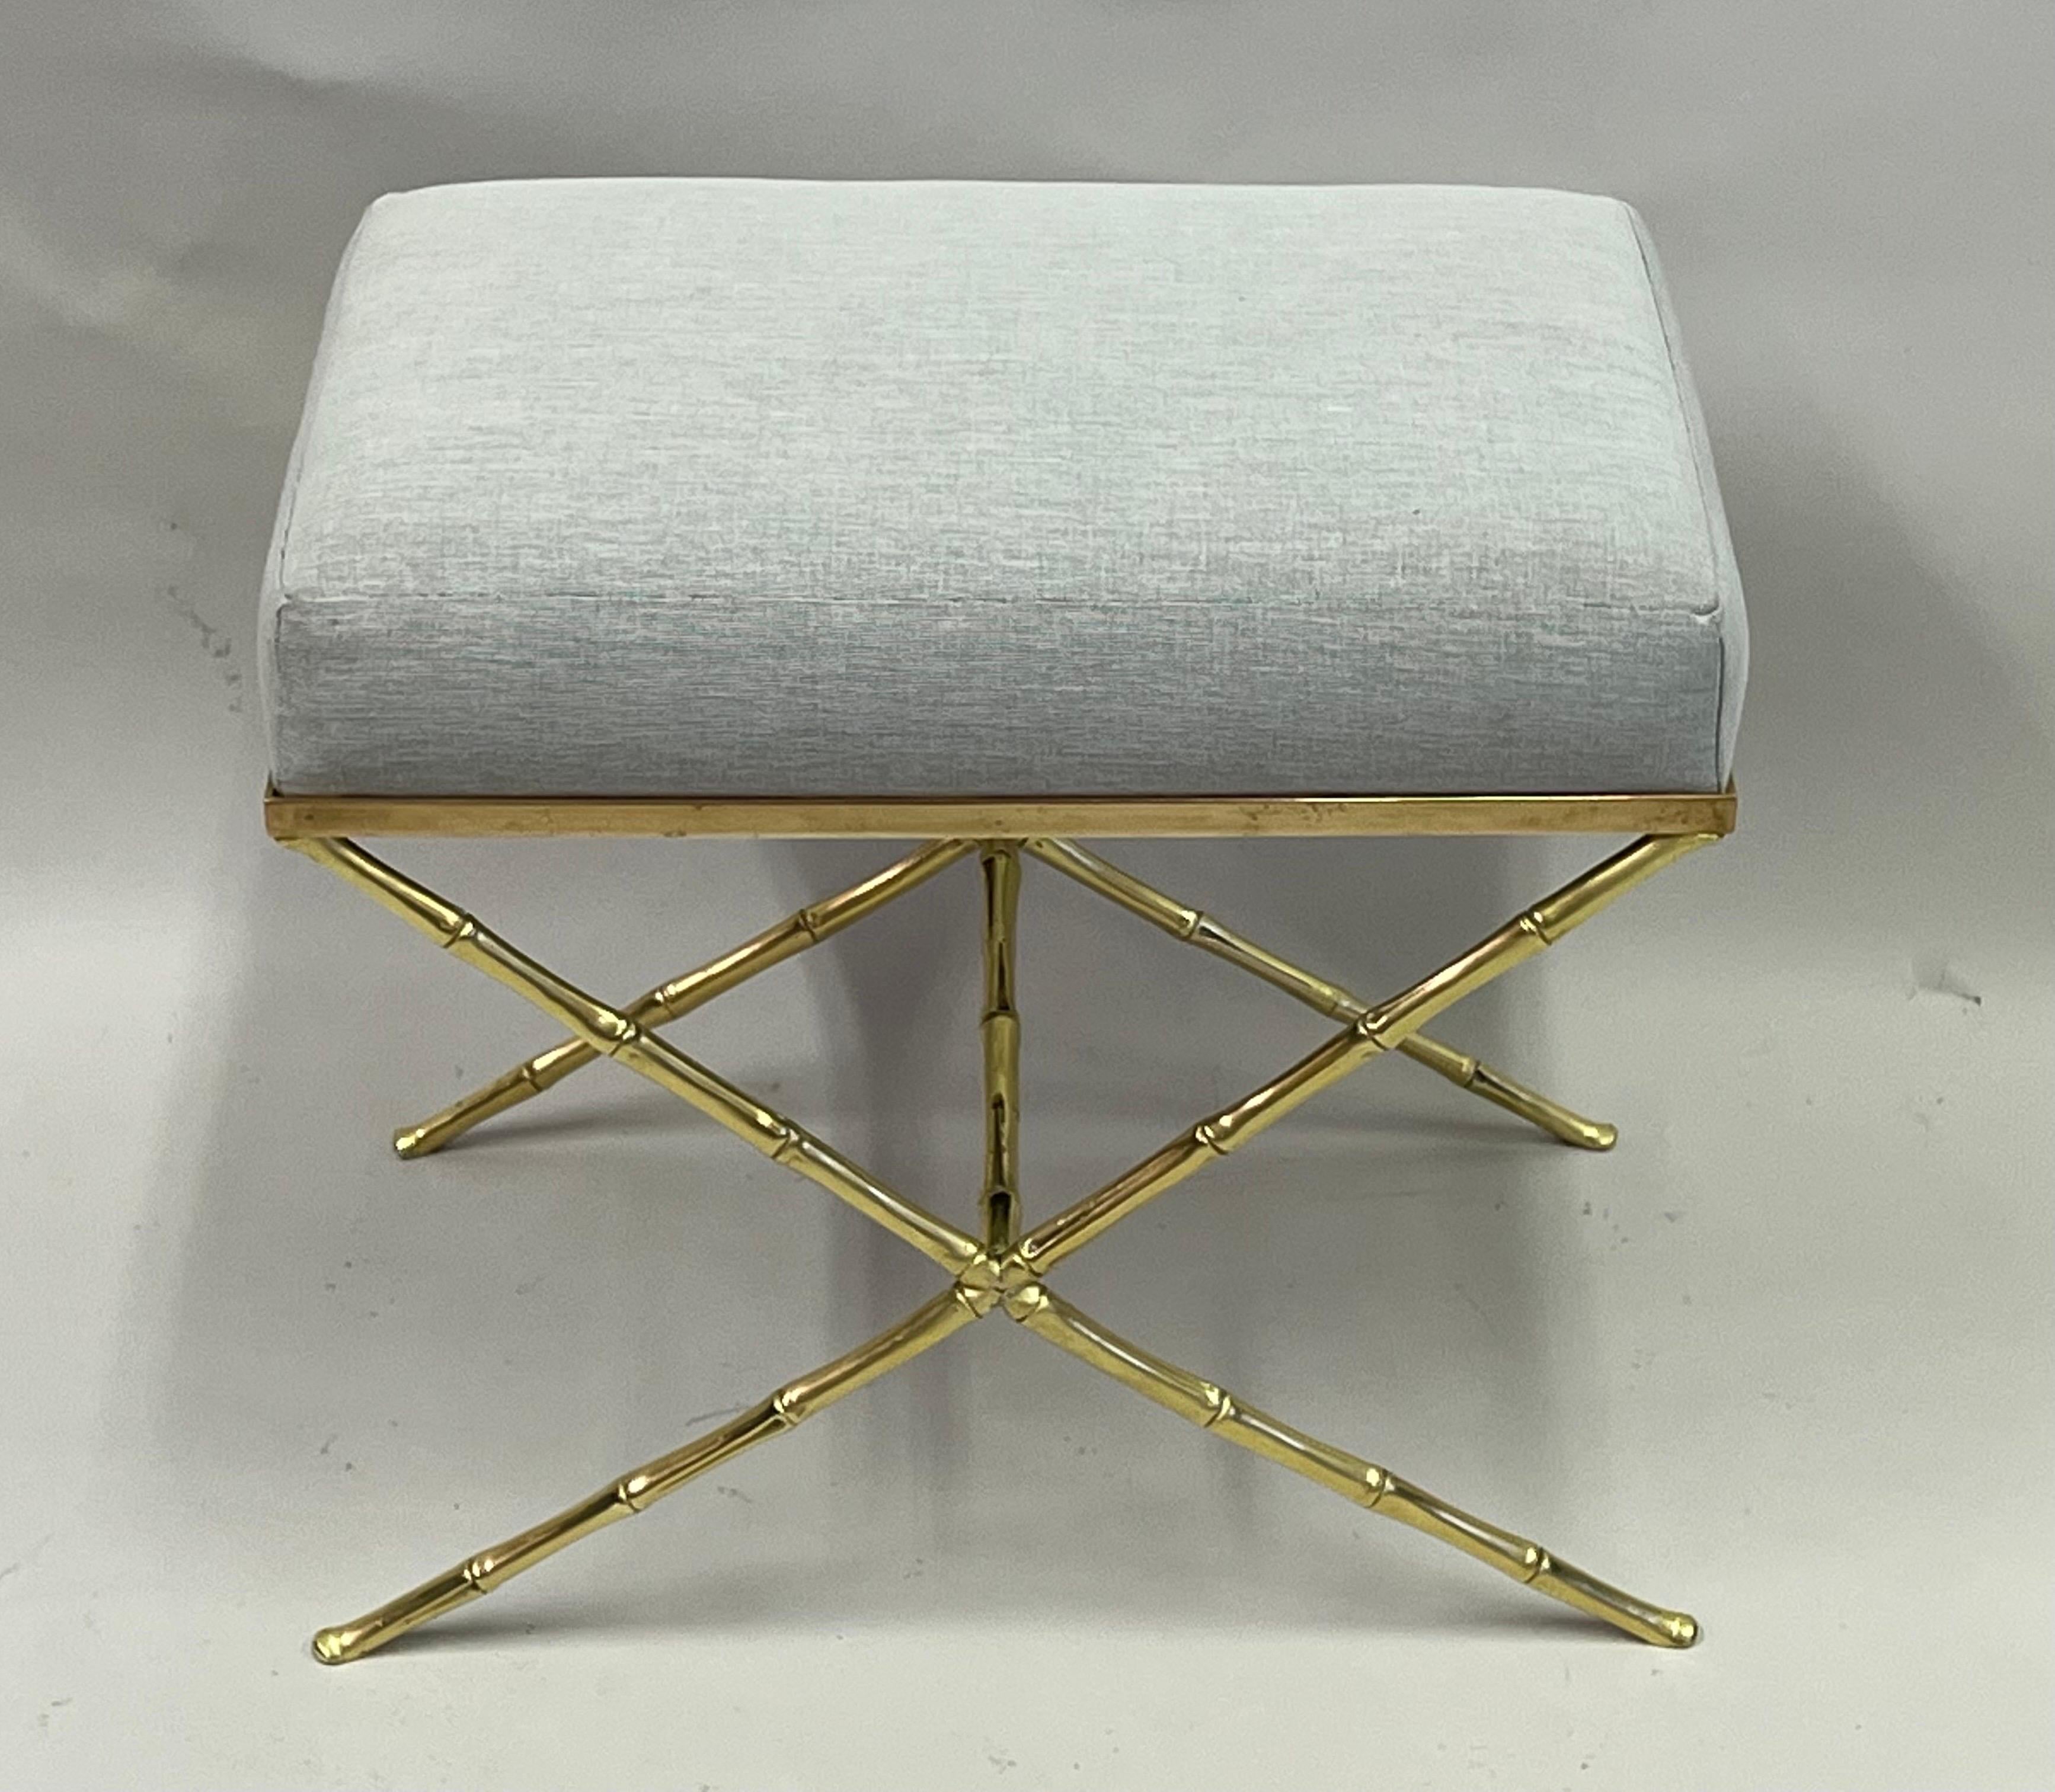 French Mid-Century Modern Neoclassical Brass Faux Bamboo Bench by Maison Baguès For Sale 3